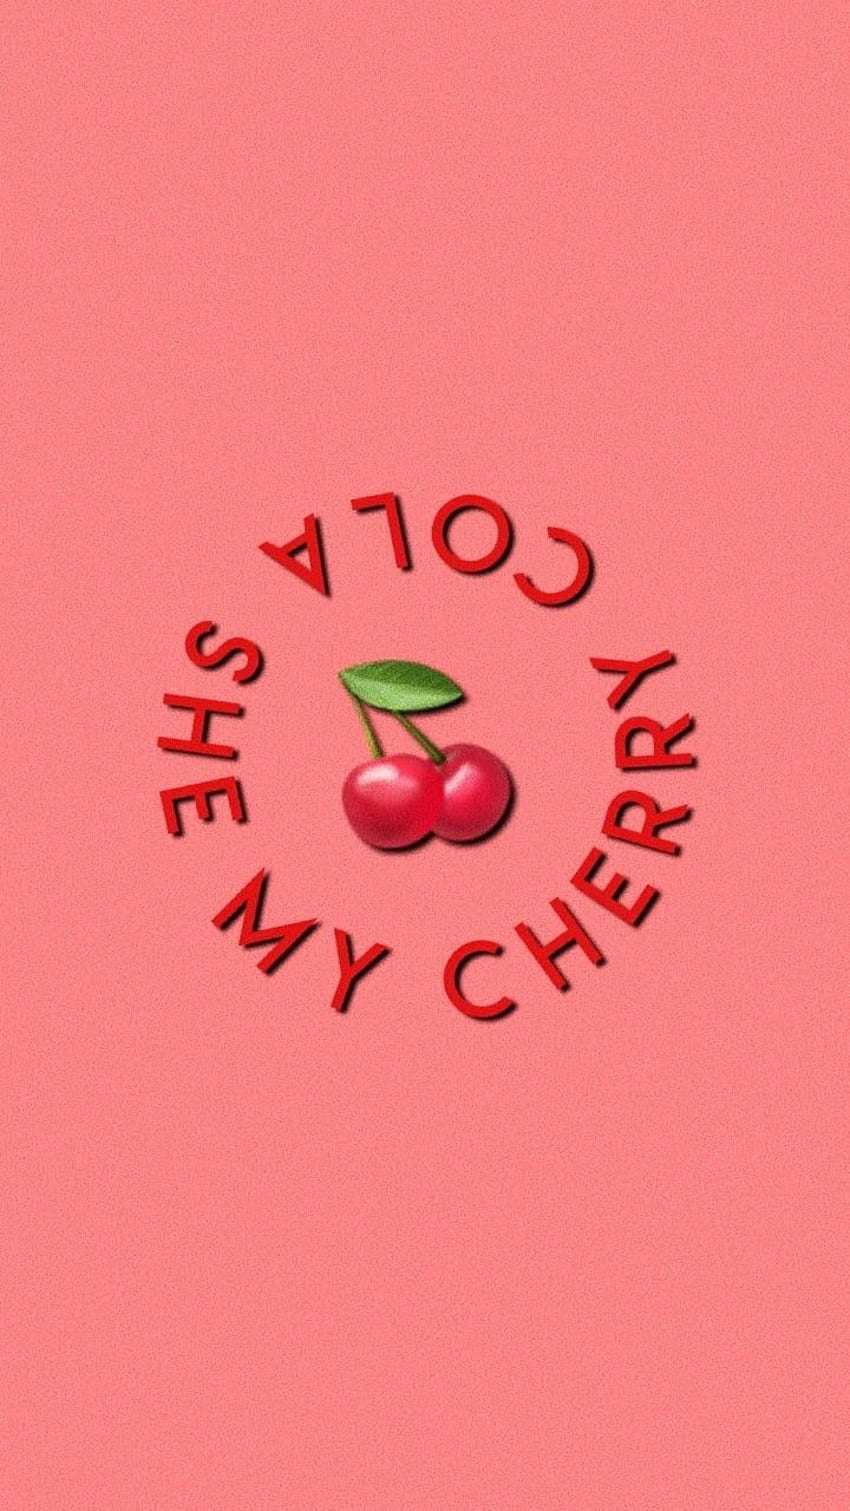 I got bored and made this, Cherry Aesthetic HD phone wallpaper